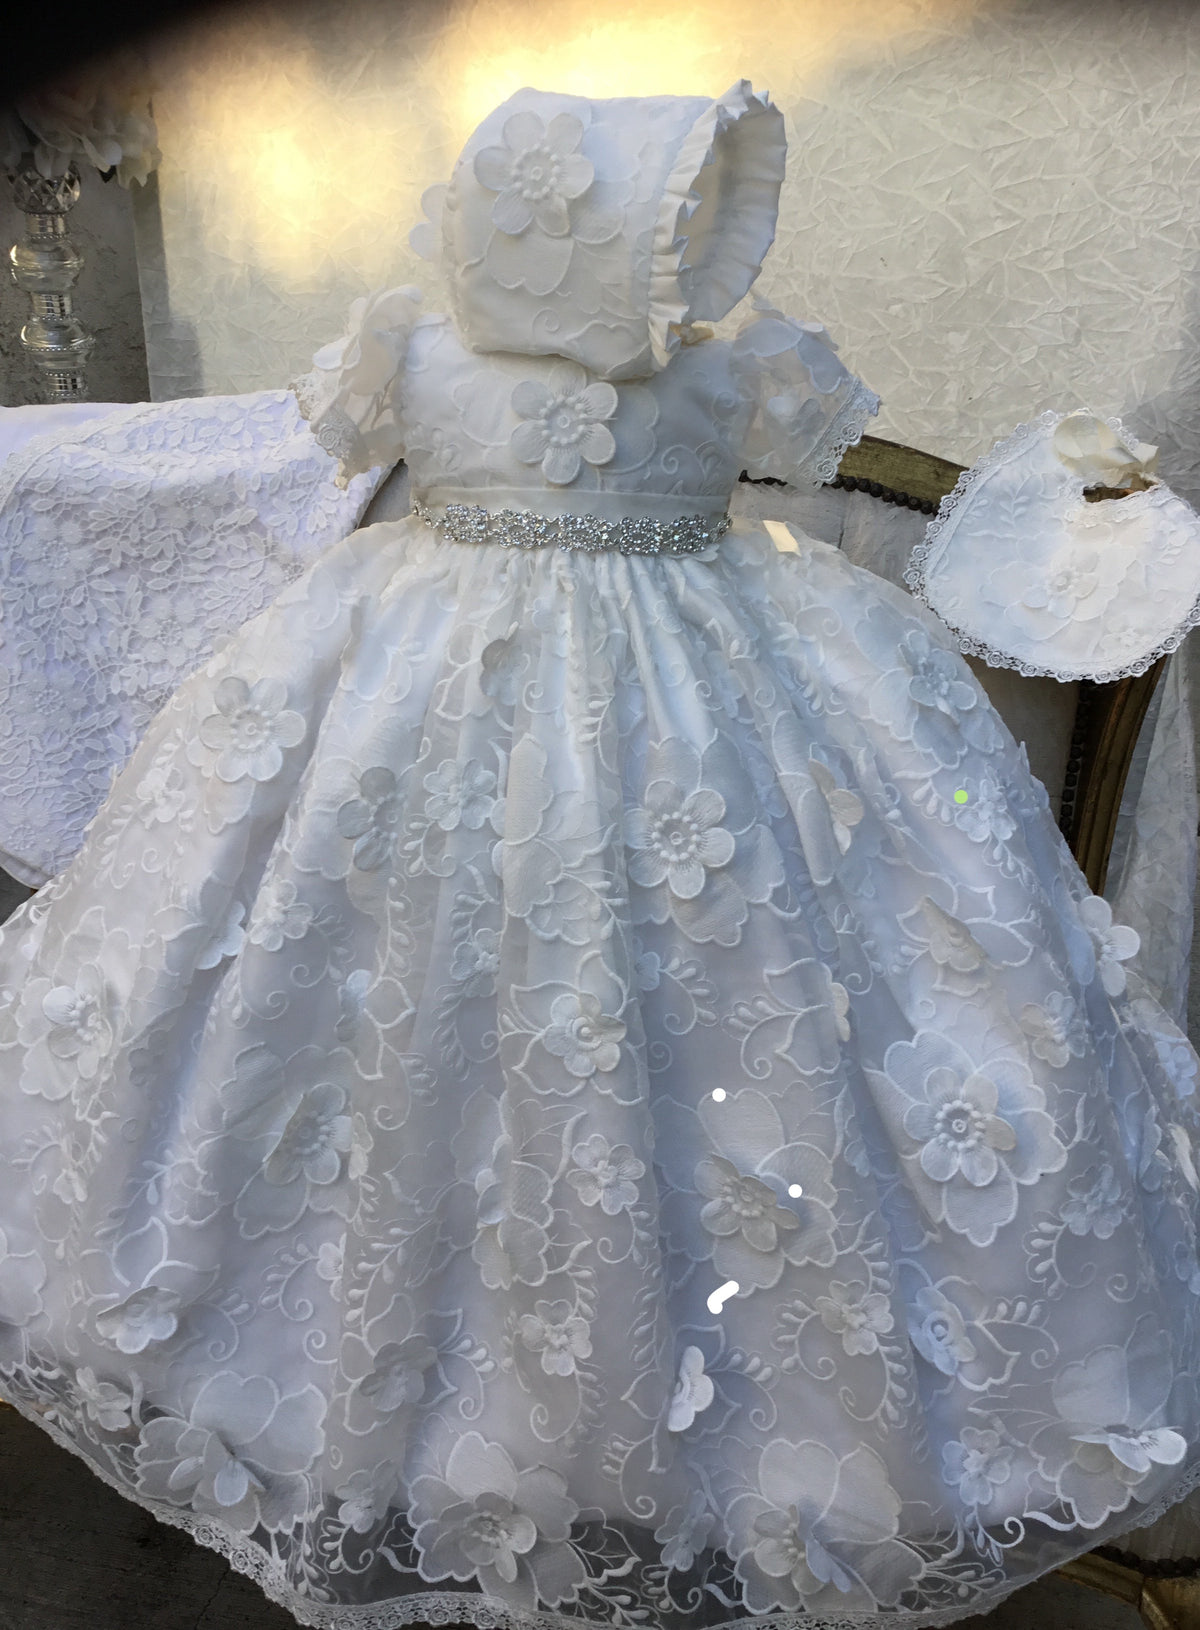 Christening Gown with Bonnet - Charlotte